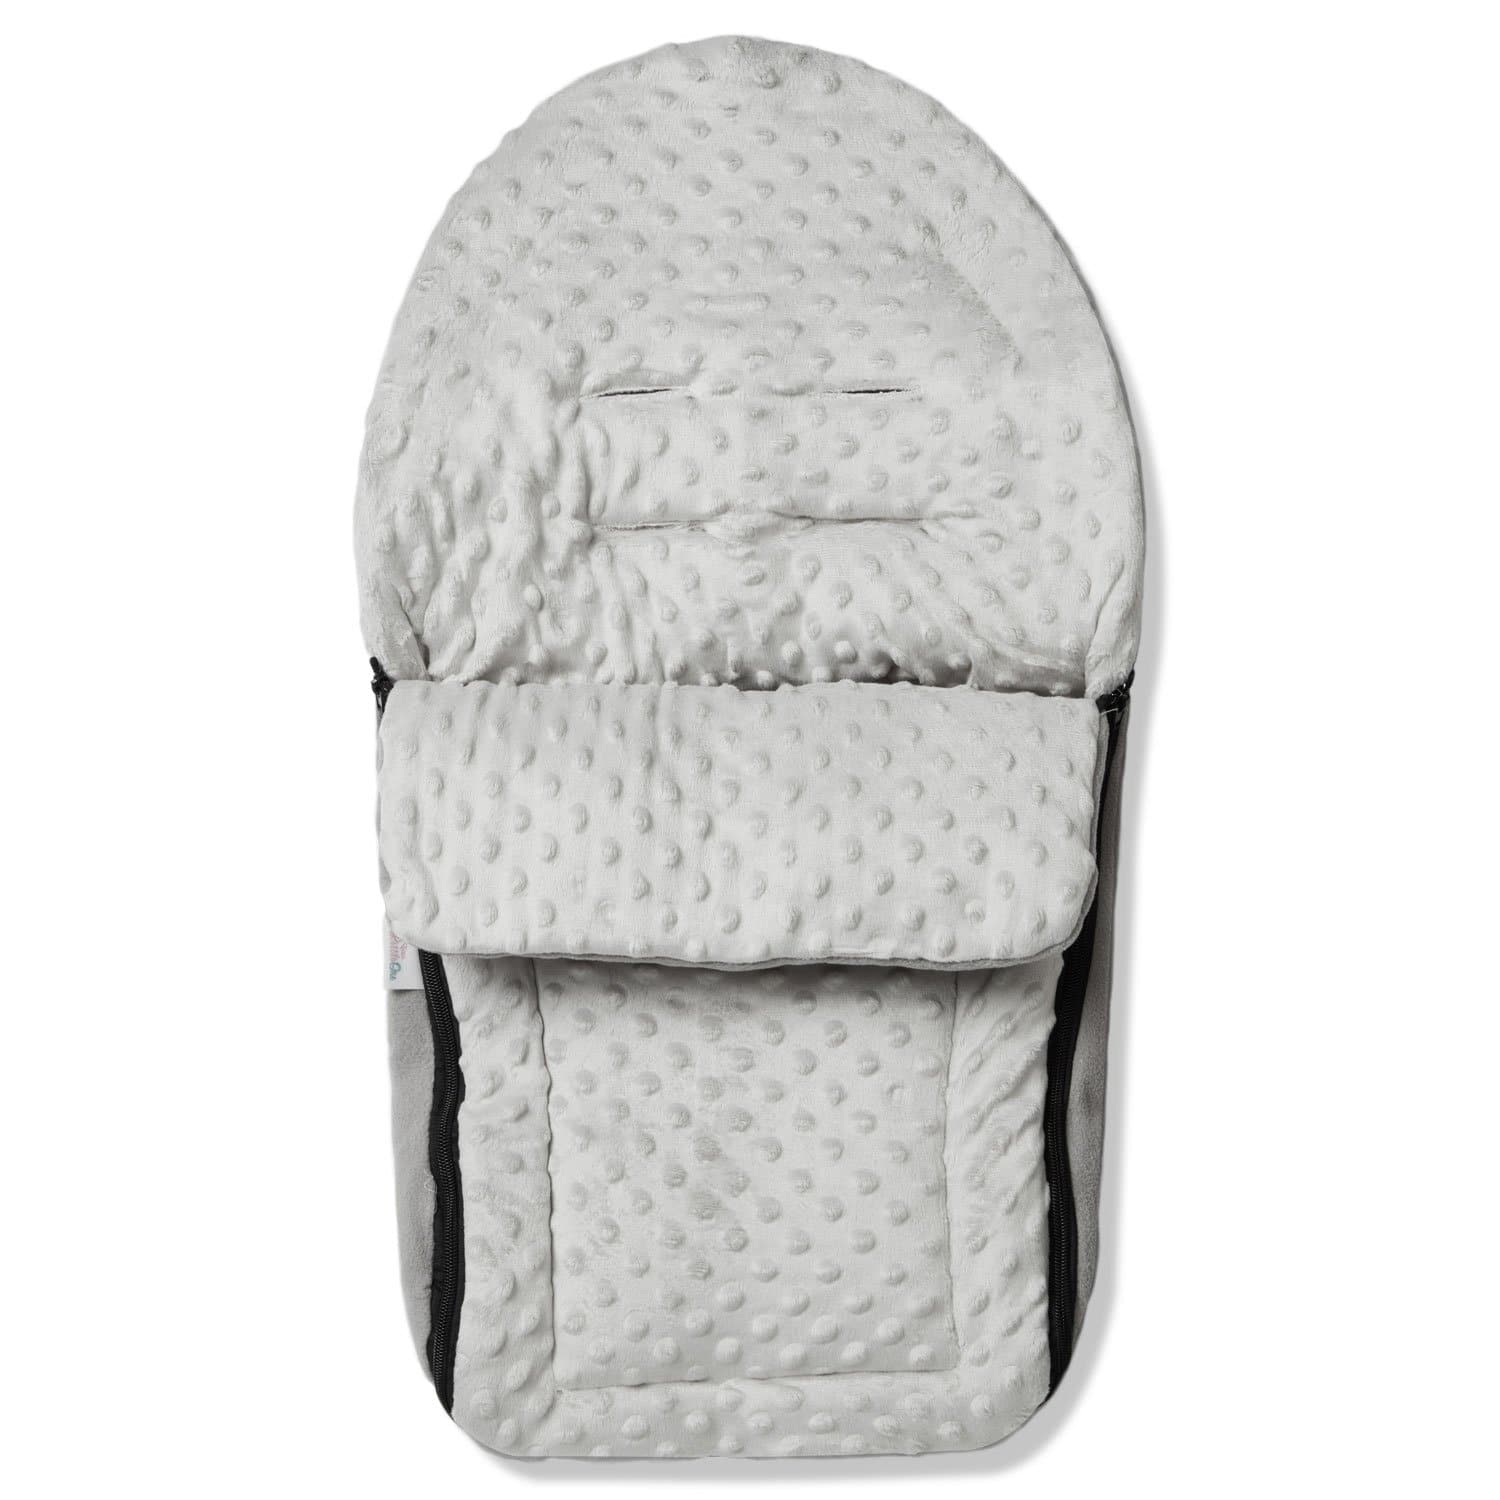 Universal Dimple Car Seat Footmuff / Cosy Toes - Fits All 3 And 5 Point Harnesses - Grey / Fits All Models | For Your Little One